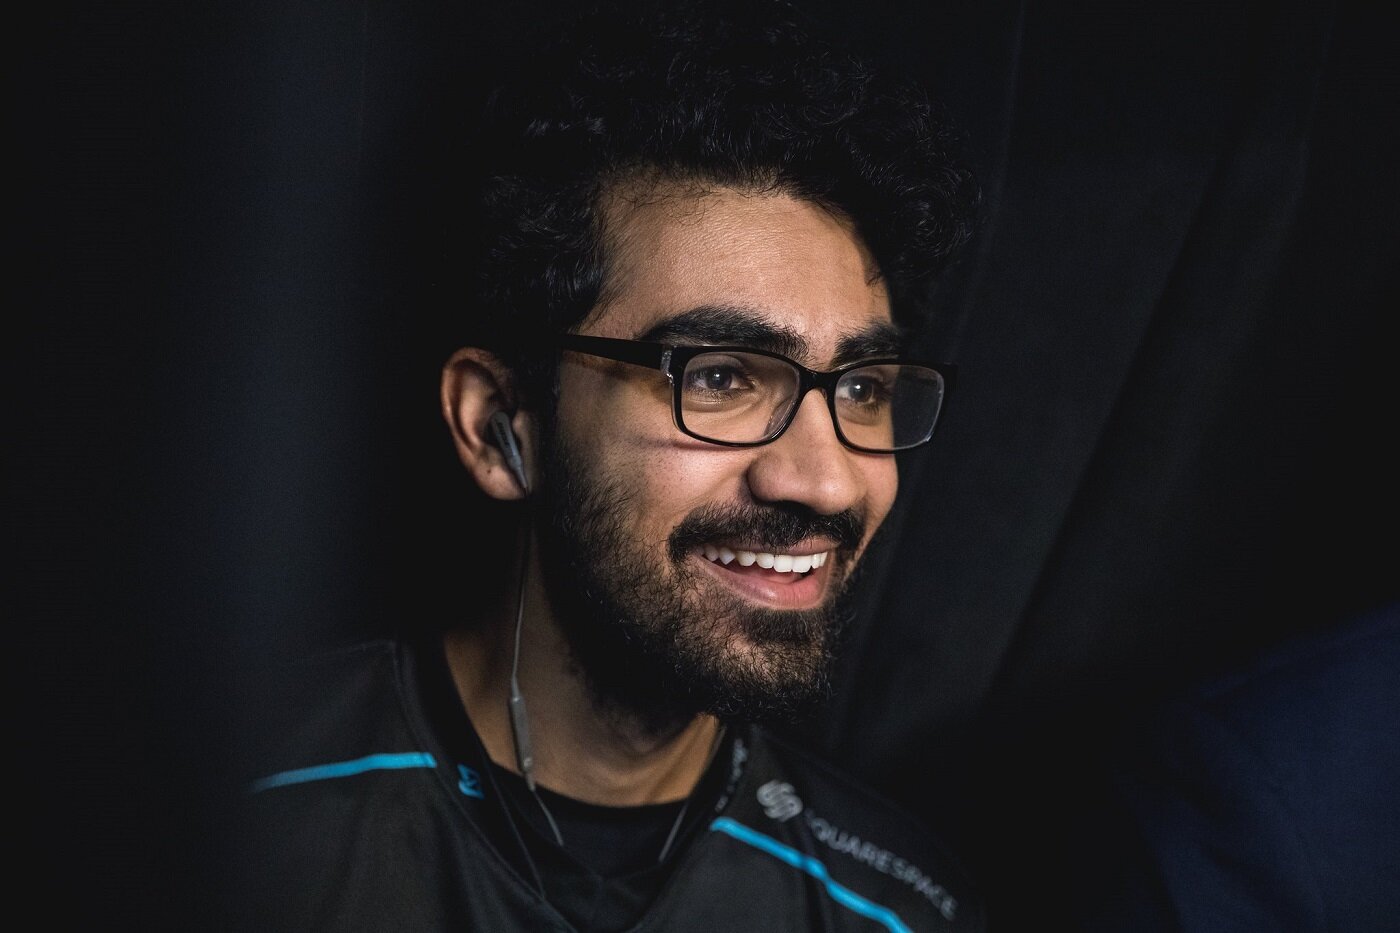 Veteran top laner Darshan “Darshan” Upadhyaya is now a free agent, after confirming his departure from Counter Logic Gaming earlier this week. (Photo courtesy of Riot Games)